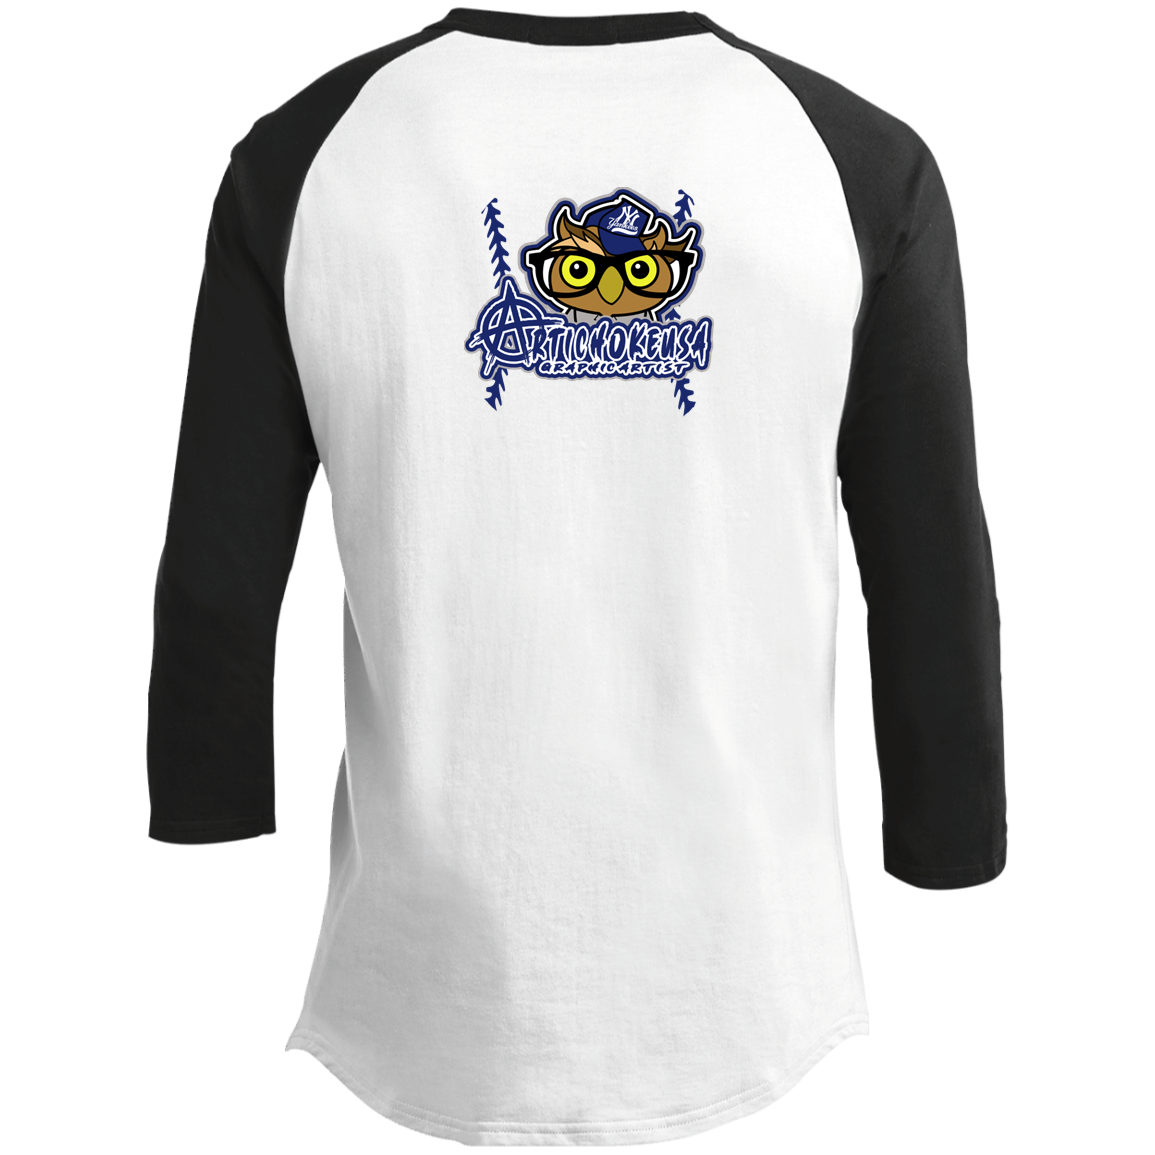 ArtichokeUSA Character and Font design. New York Owl. NY Yankees Fan Art. Let's Create Your Own Team Design Today. Men's 3/4 Raglan Sleeve Shirt